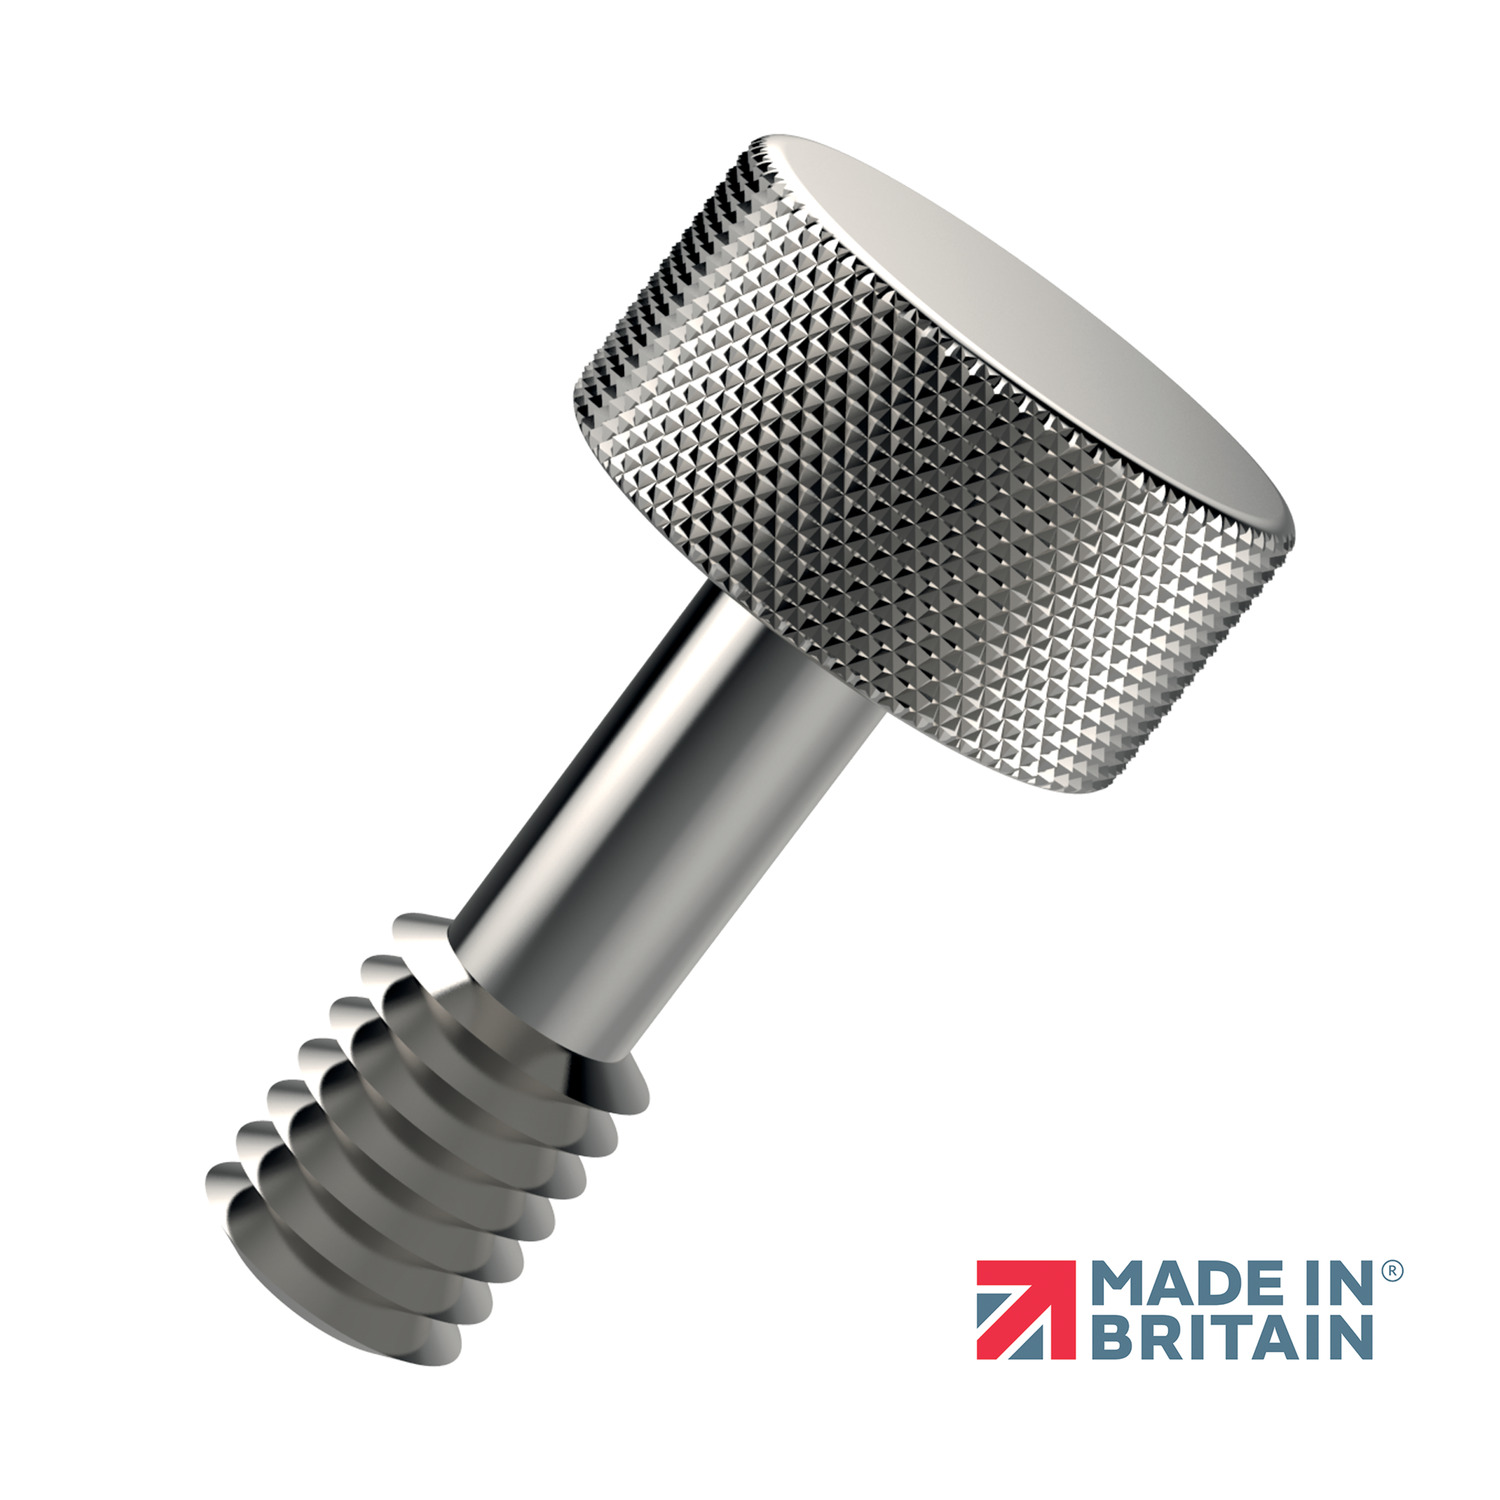 Captive Thumb Screws Stainless steel captive thumb screws. Available in black oxide or zinc plated steel, brass or aluminium on request.